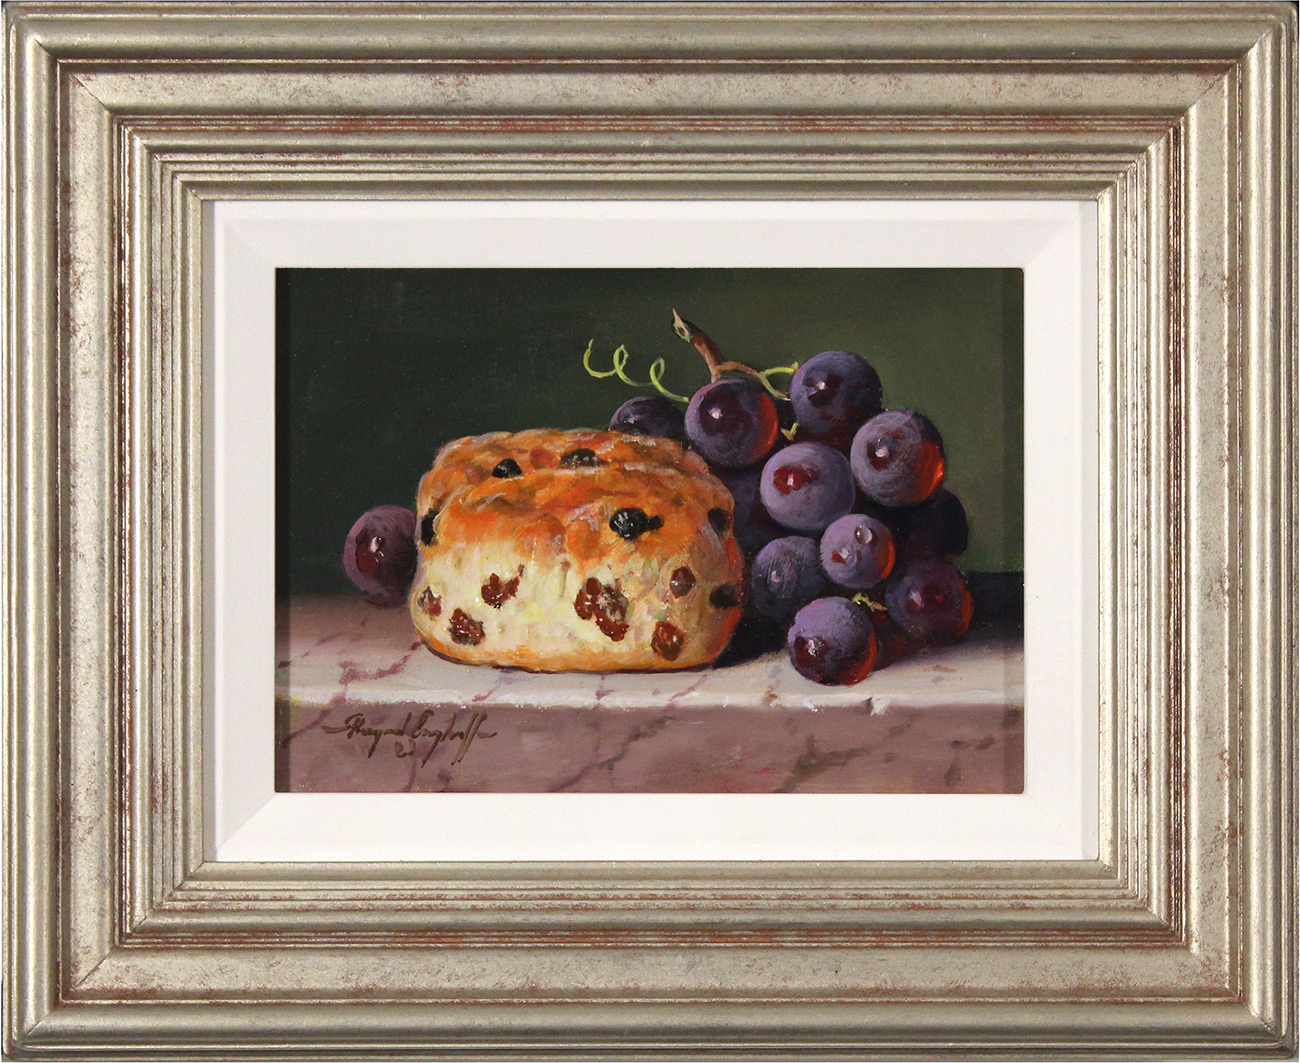 Raymond Campbell, Original oil painting on panel, Scone with Grapes. Click to enlarge